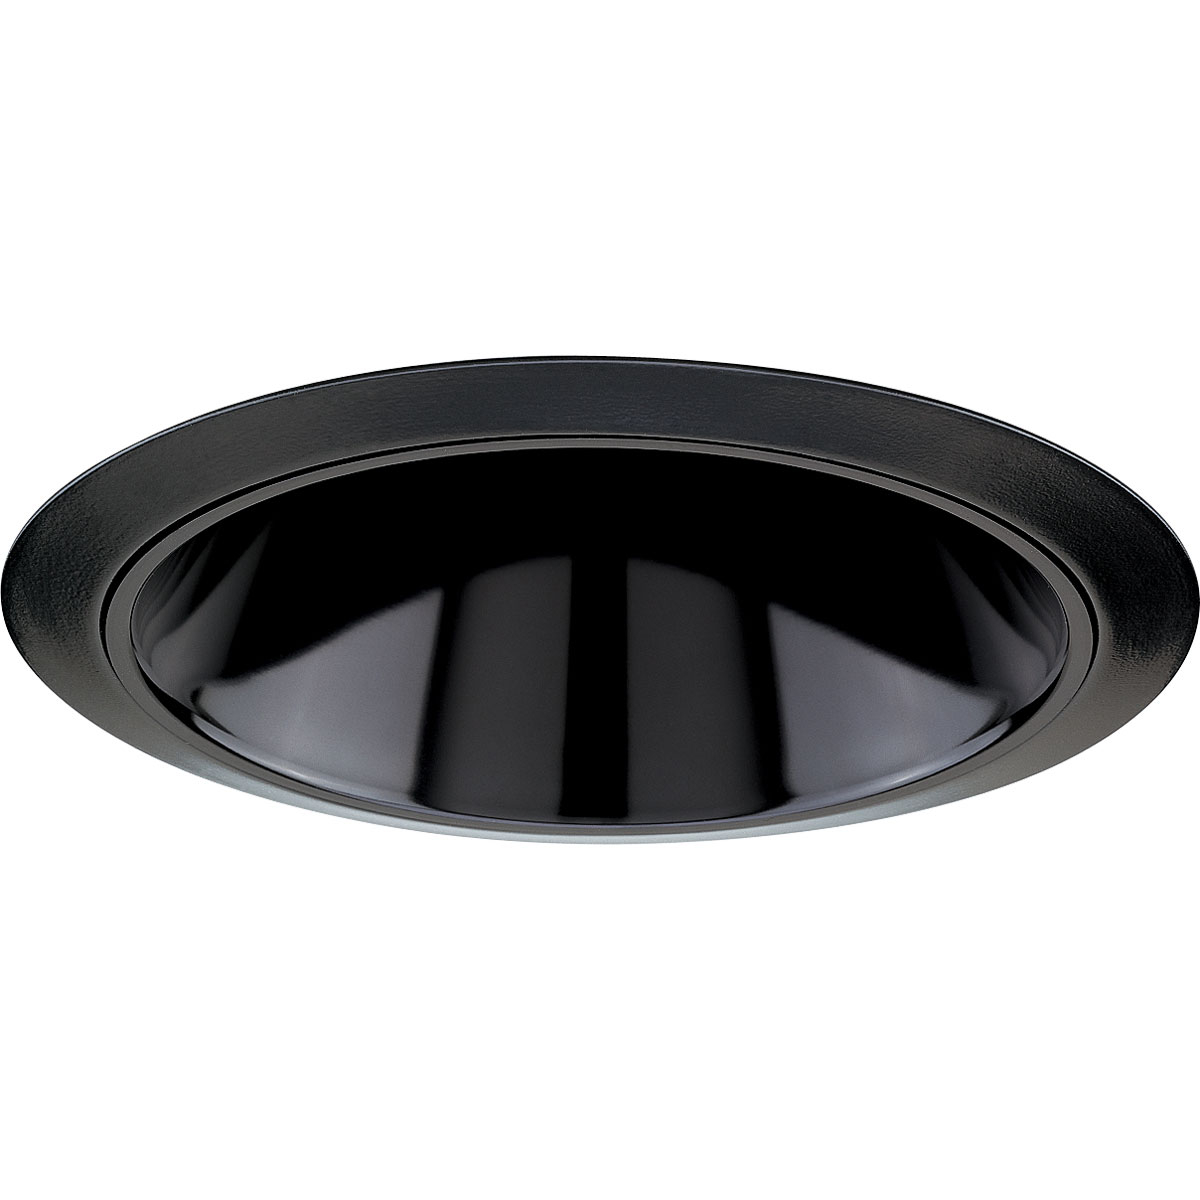 Black Alzak Cone recessed trim for use with insulated ceilings. 7-3/4 in outside diameter. Black color is ideal for home theaters or dark ceiling and walled rooms.